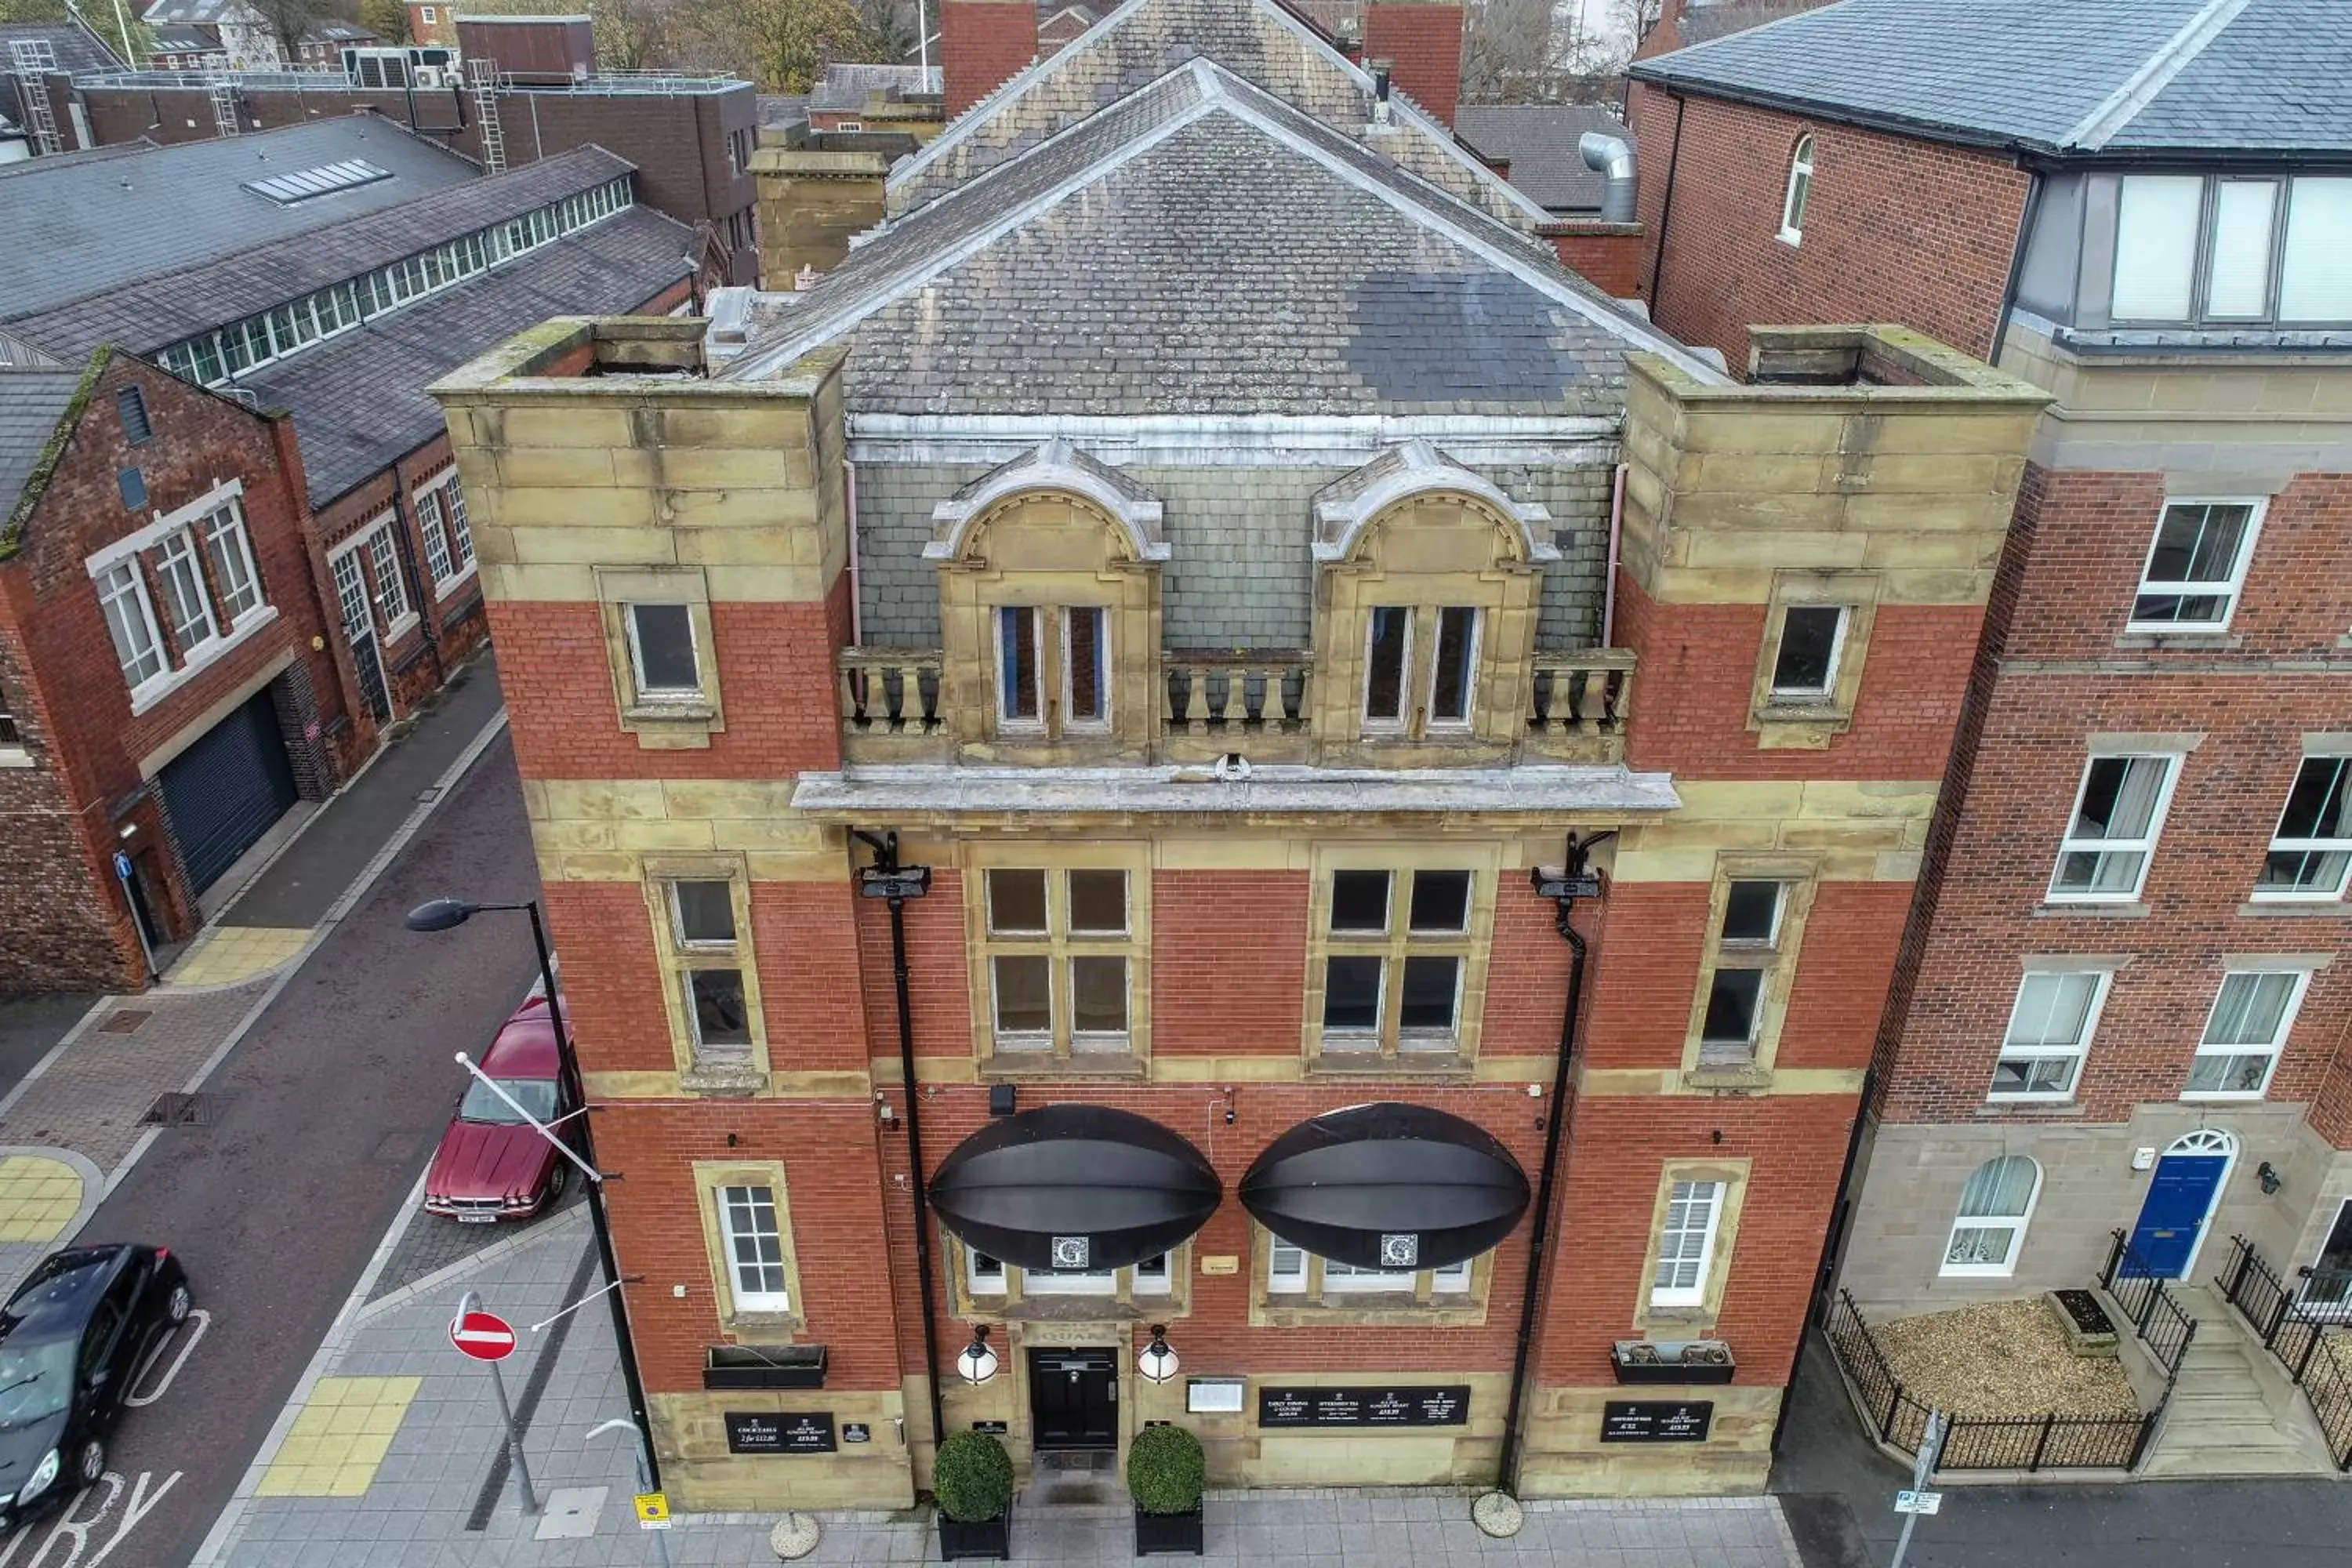 Property building in The Old Post Office Warrington by Deuce Hotels